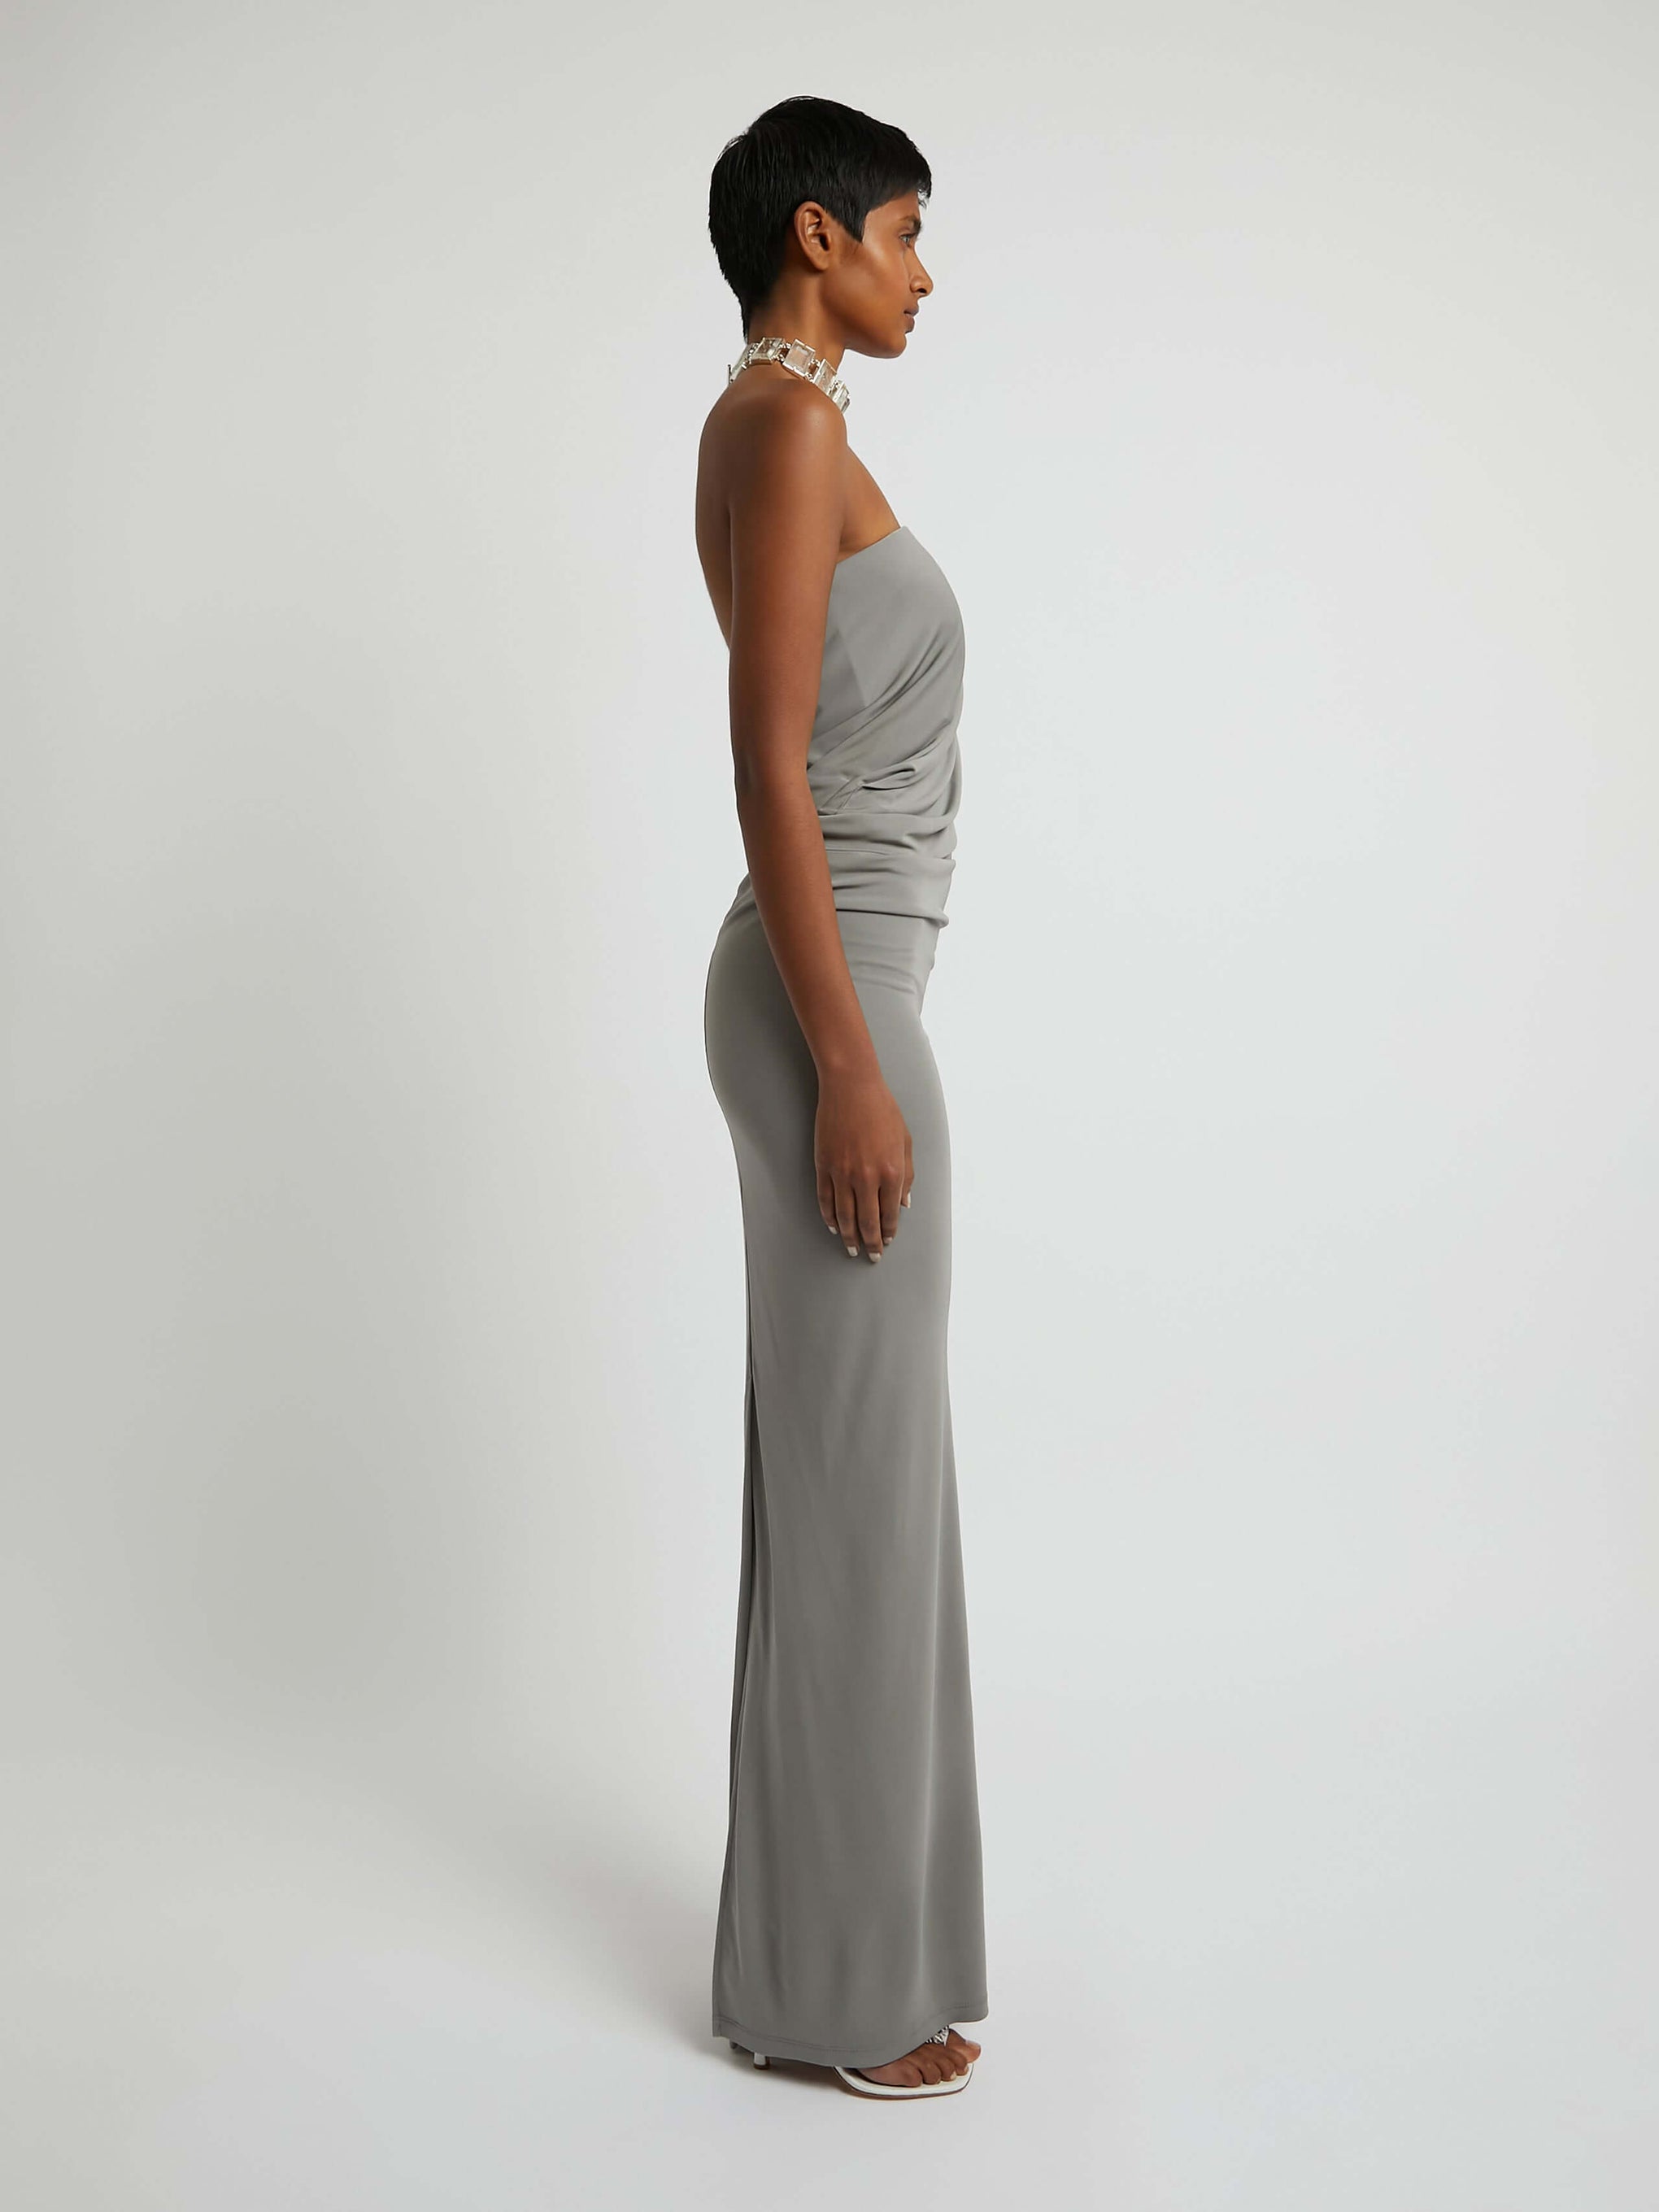 Christopher Esber Strapless Ruche Dress in Concrete available at TNT The New Trend Australia. Free shipping on orders over $300 AUD.